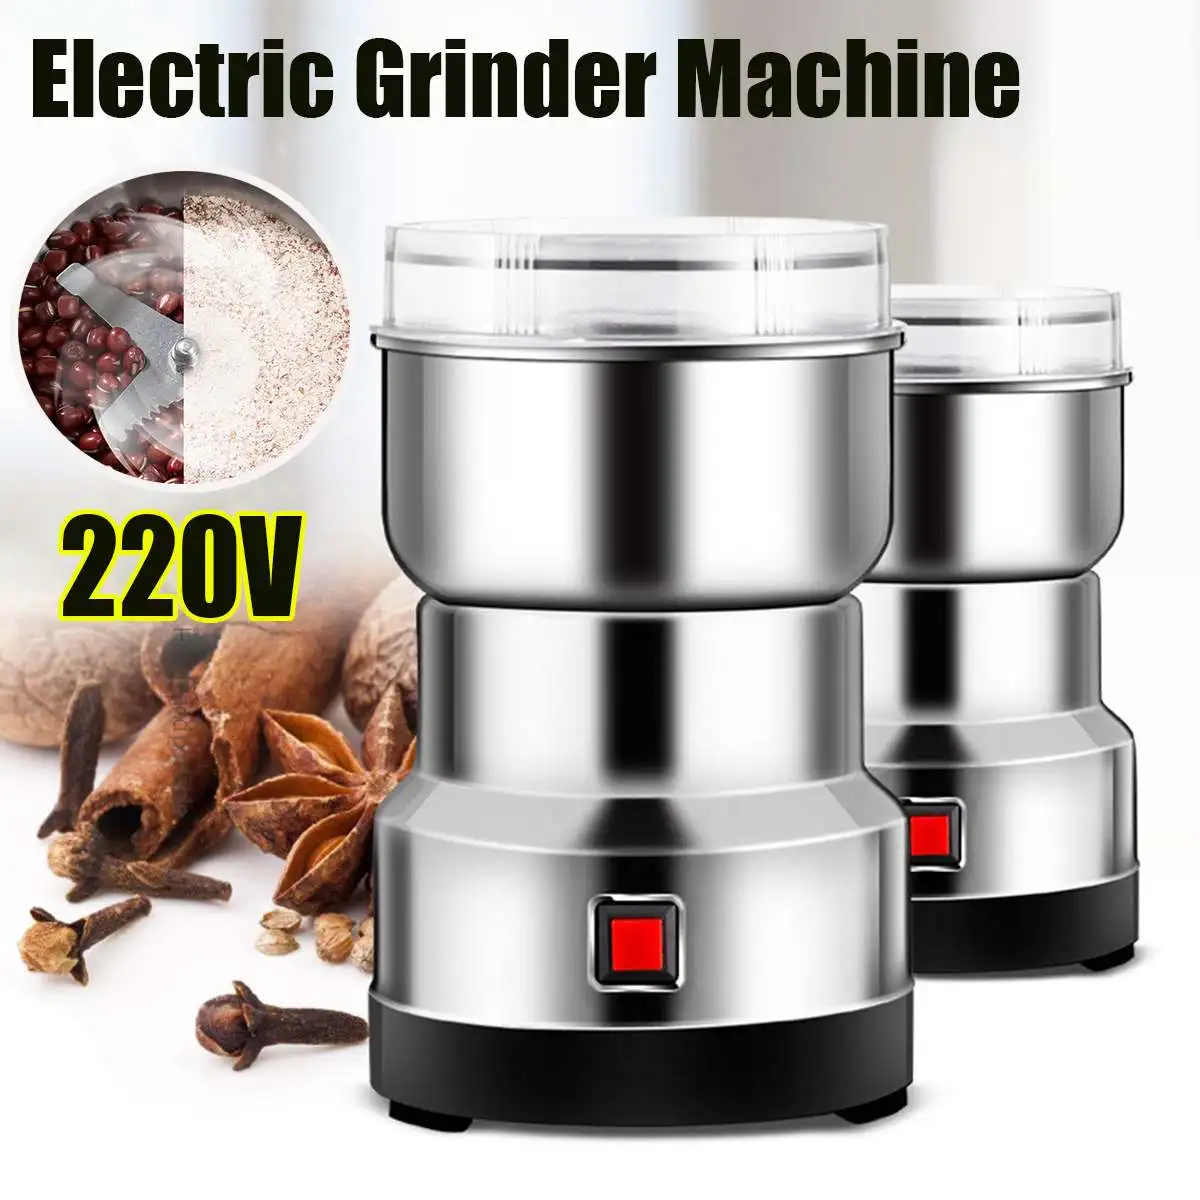 

warmtoo 300W Electric Coffee Grinder Stainless Grain Spices Hebal Nuts Dry Food Bean Grinding Machine Milling Powder Crusher